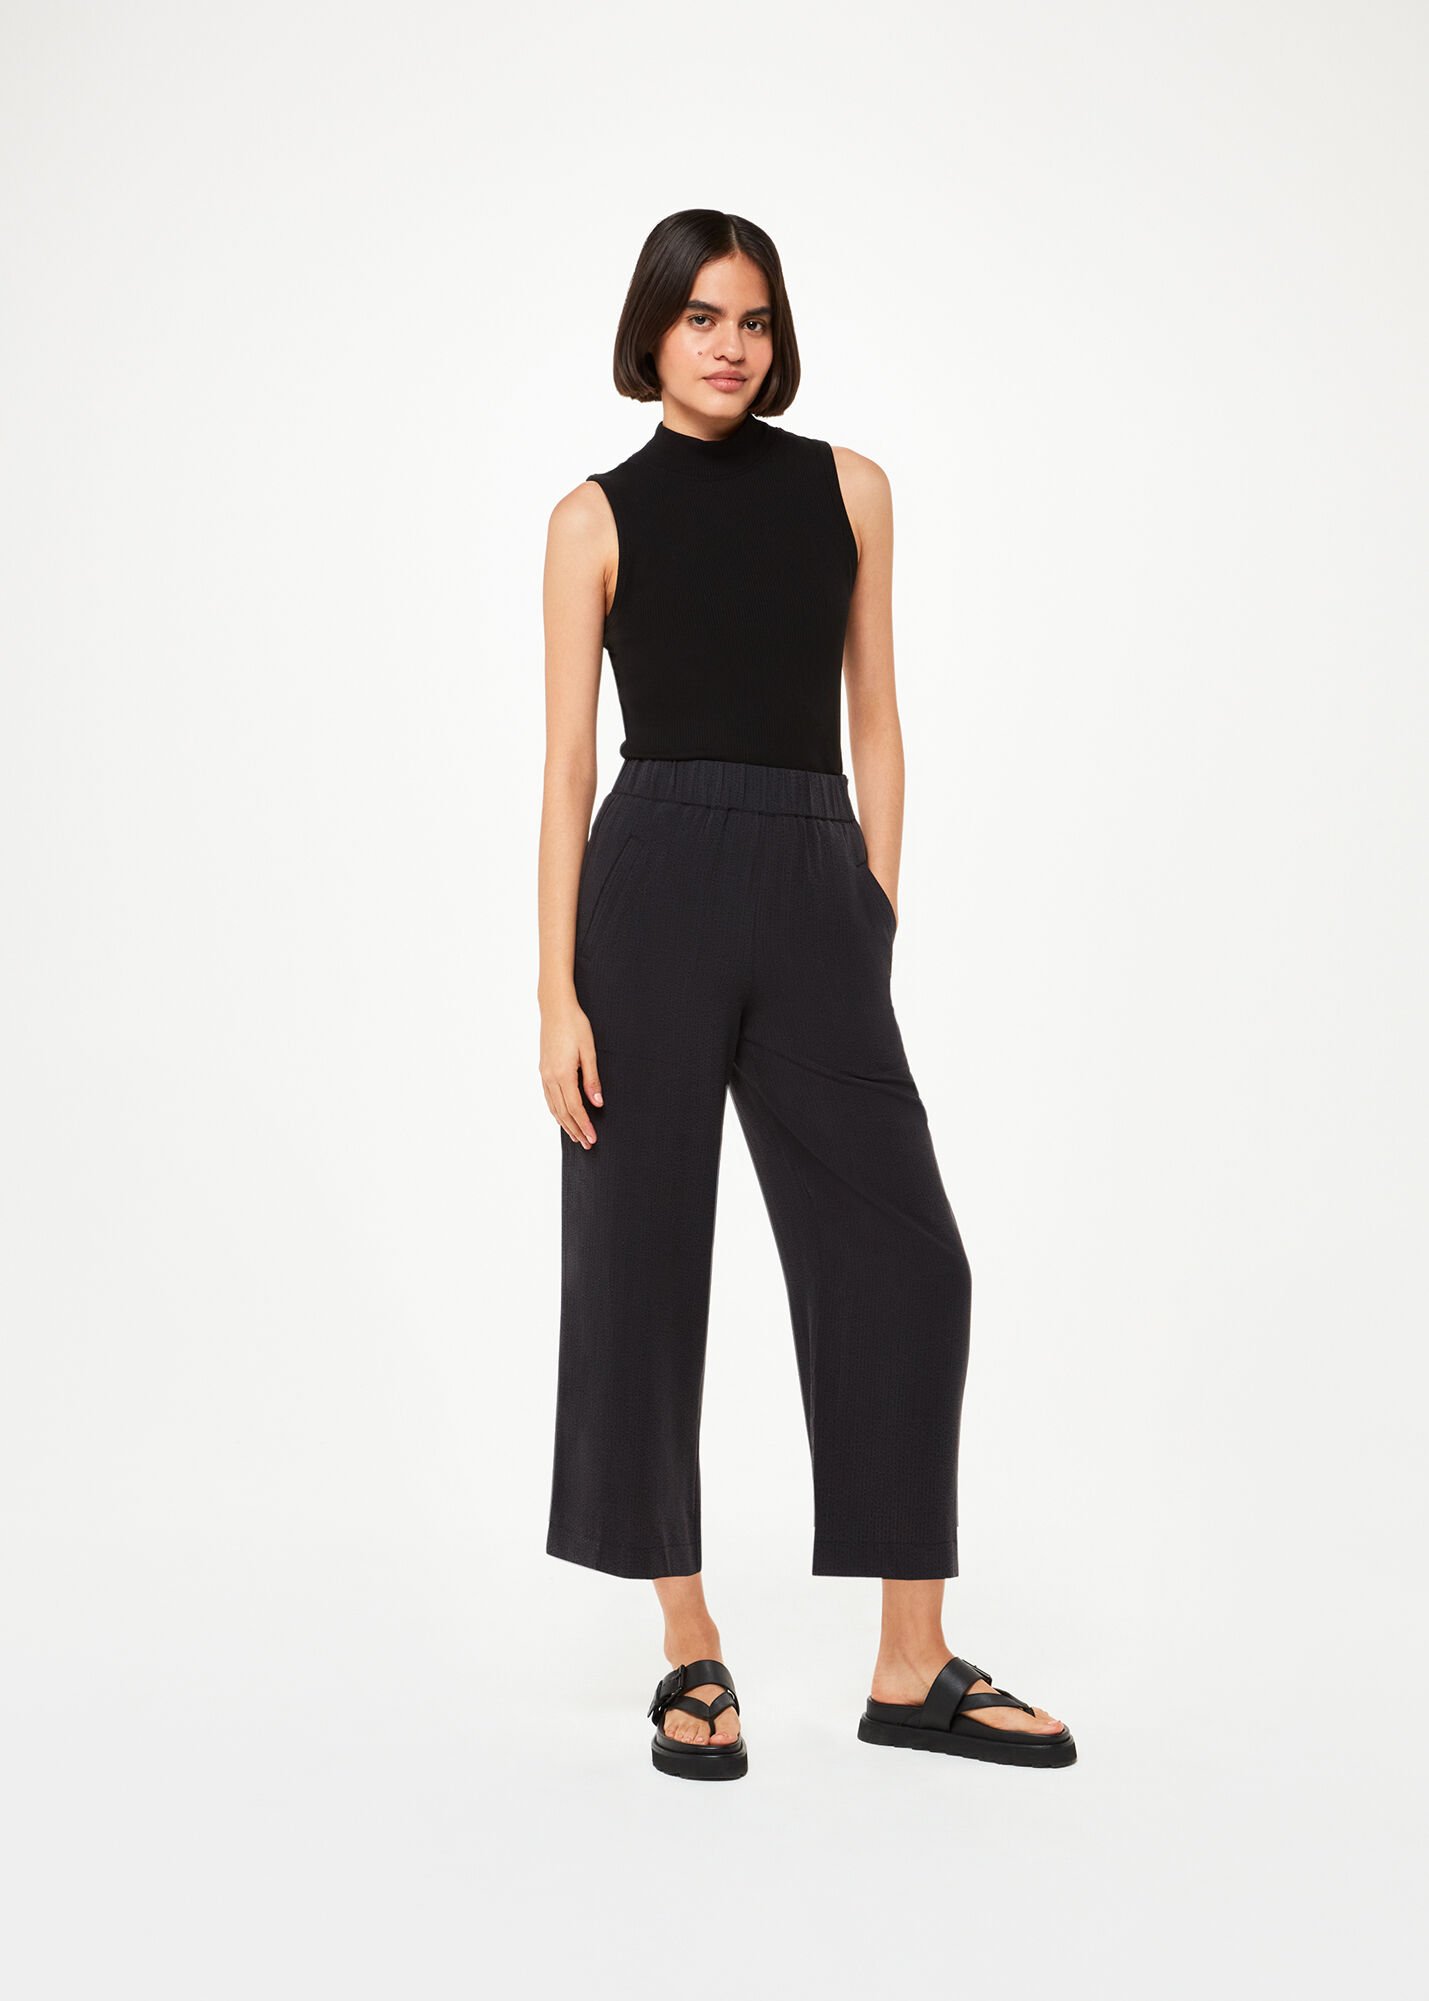 Buy Solid Grey Side Zip Panel Pant For Women  Chique